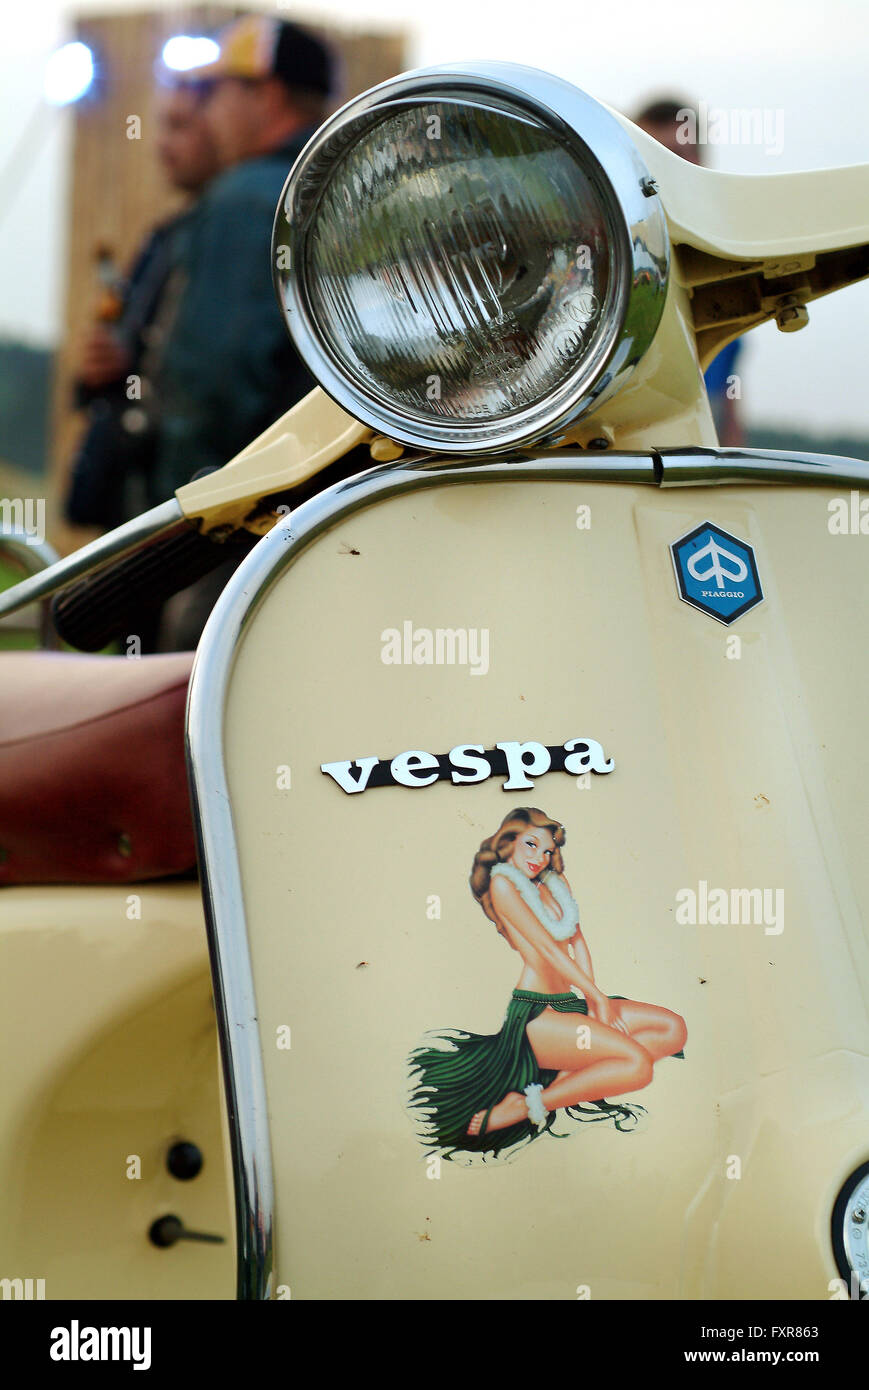 https://c8.alamy.com/comp/FXR863/osterhofen-germany-25th-july-2004-files-a-vespa-scooter-with-a-hawaii-FXR863.jpg